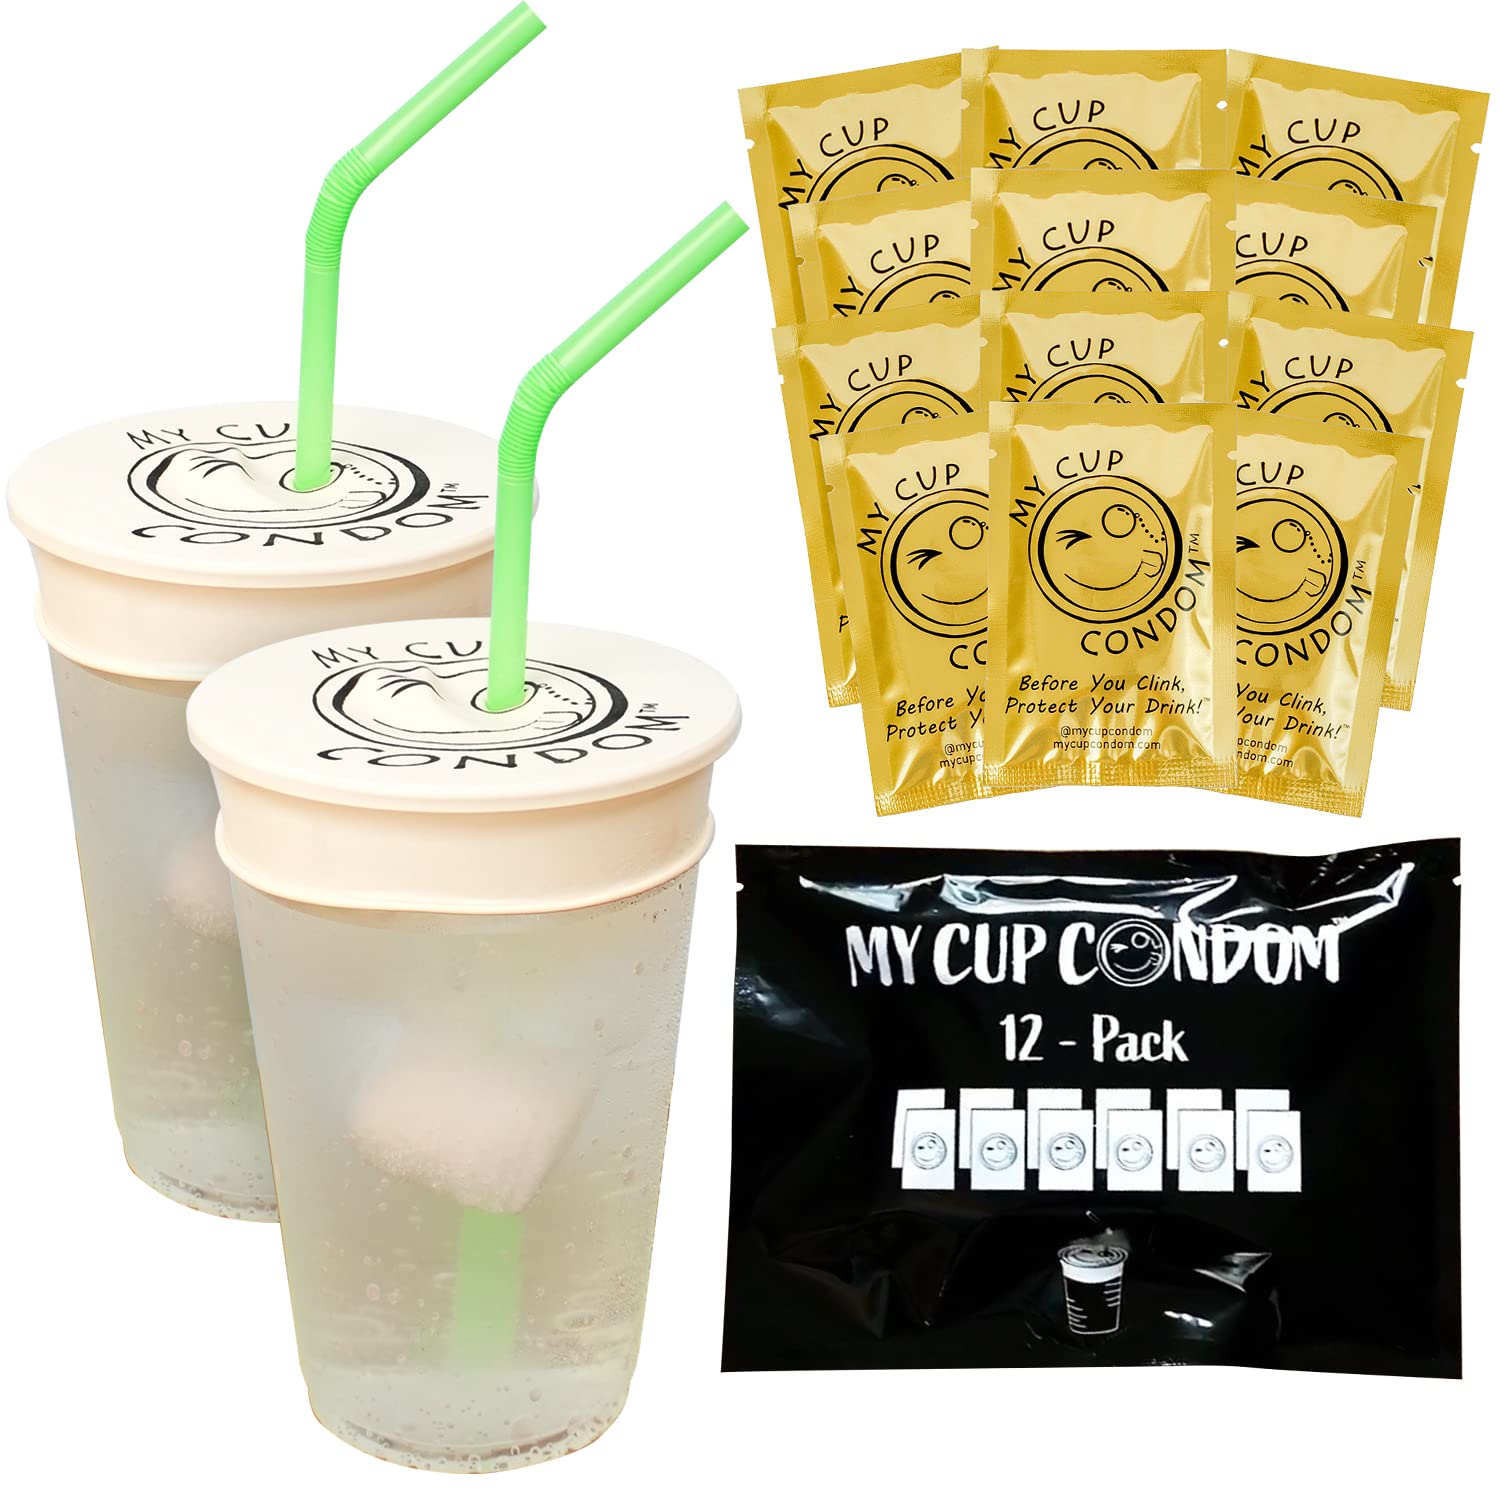 My Cup Cover Drink Protection Cap (12 Pack) - The Original Cup Cover for  Drink Spiking Prevention - 12 Individually Wrapped, Reusable, Latex Drink  Covers with Straw Hole, Fits All Cup Sizes 12 Count (Pack of 1)